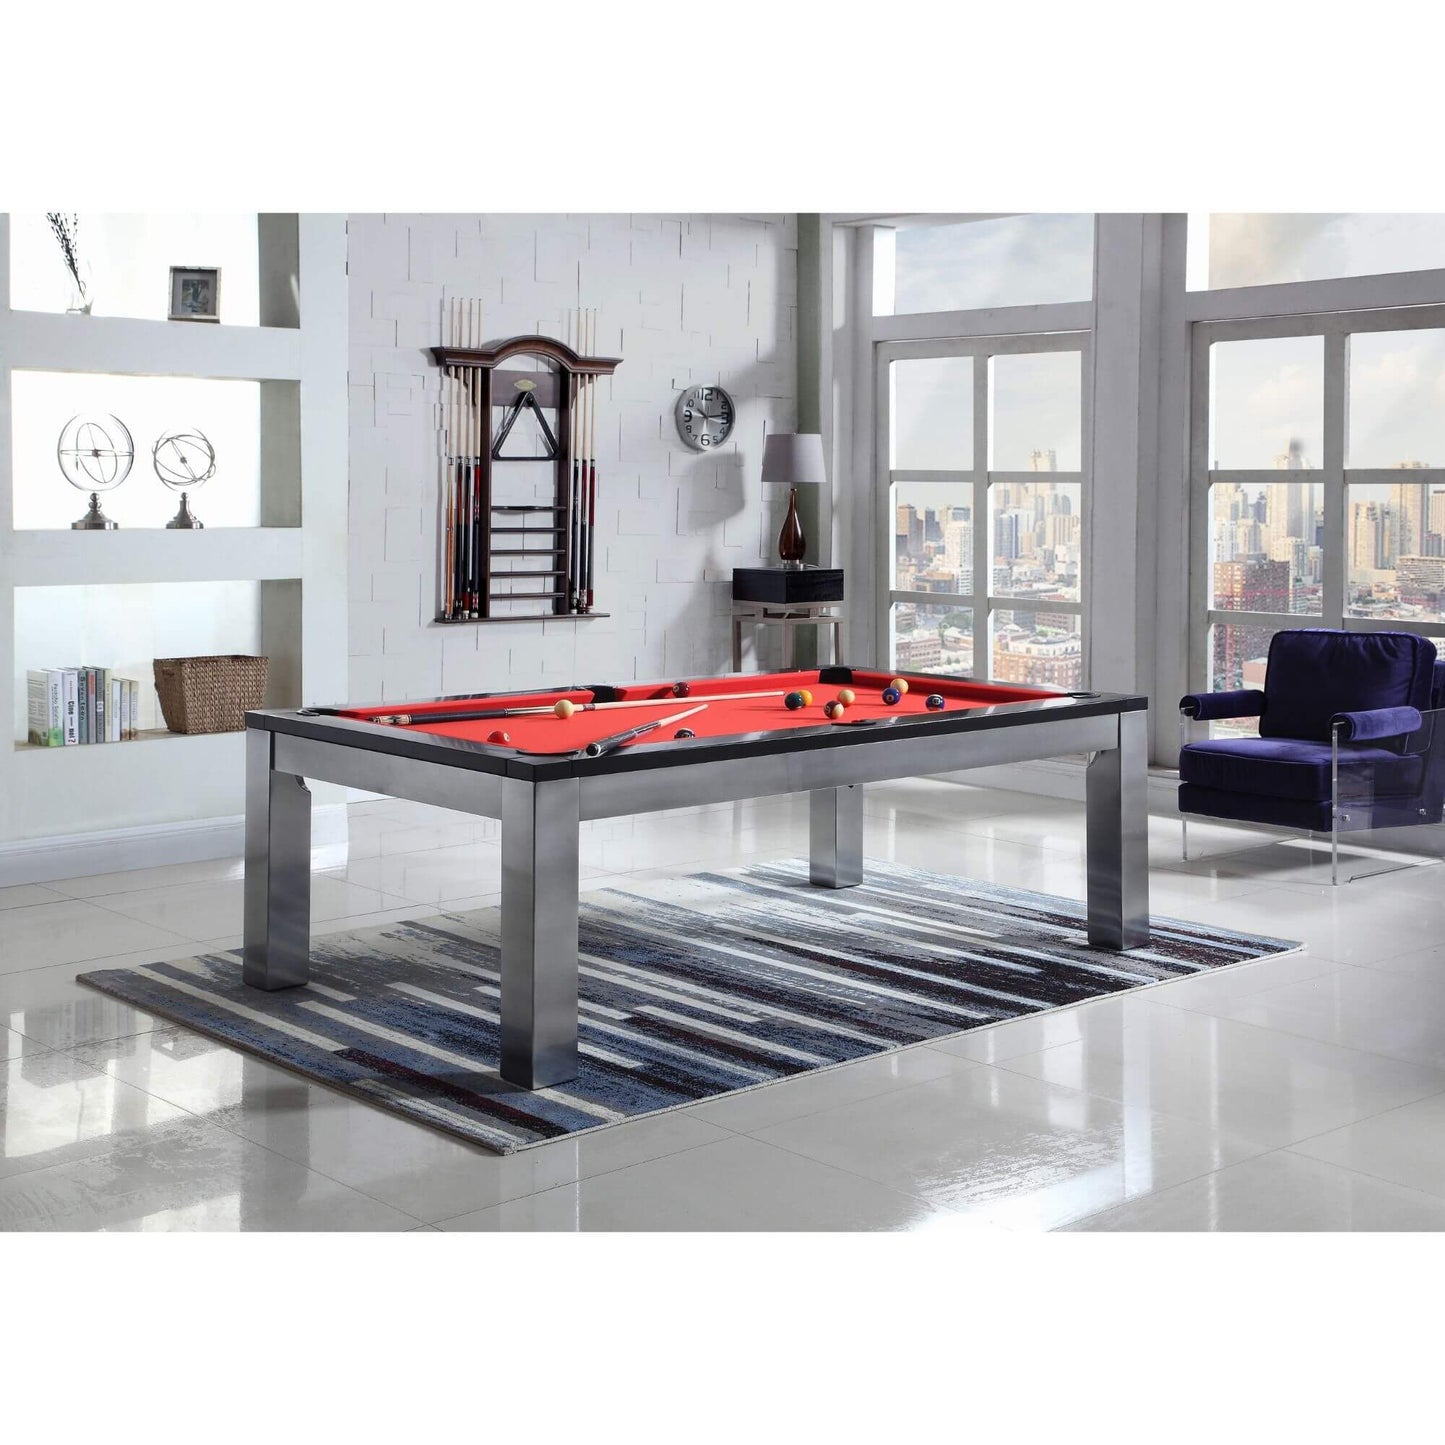 Playcraft Monaco Slate Pool Table with Dining Top - Gaming Blaze